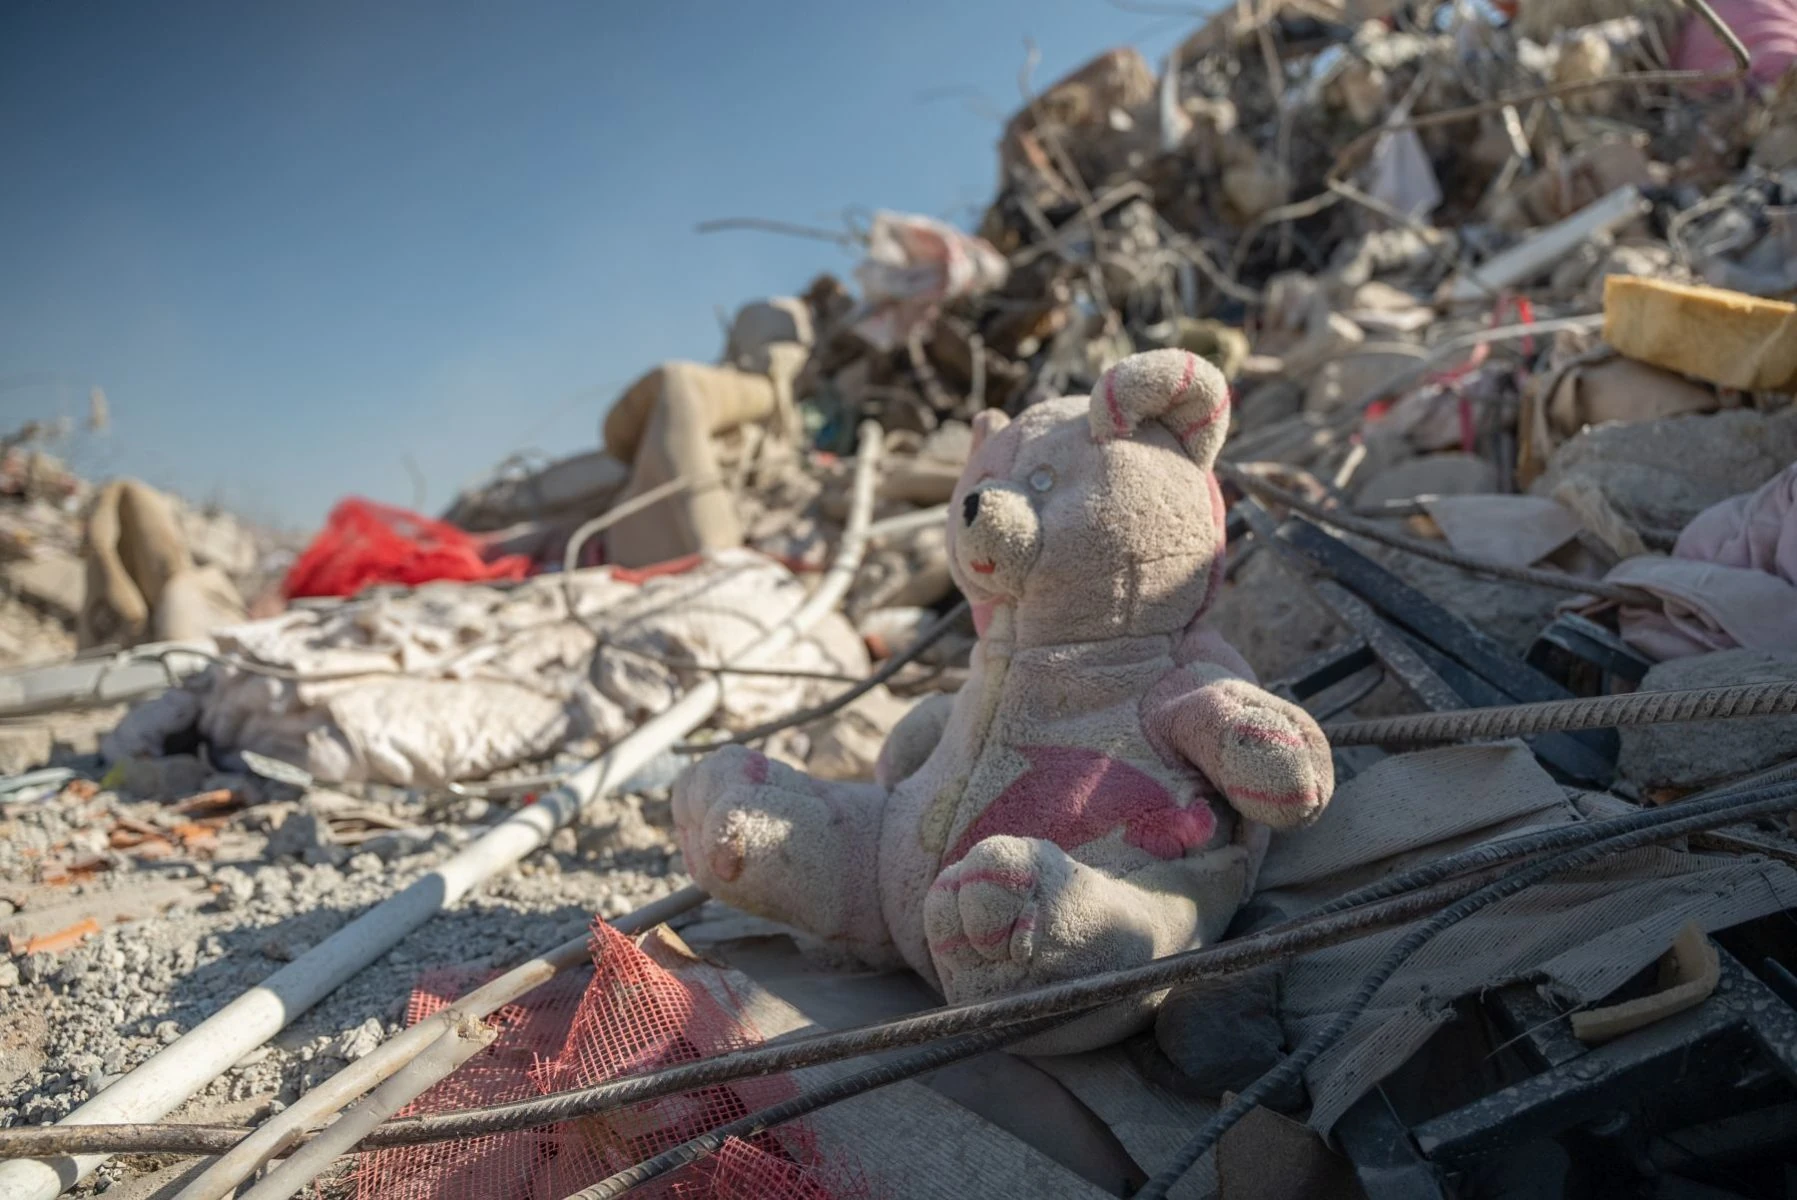 A teddy bear sits in the earthquake rubble in Turkey surrounded by cable, rebar and concrete remnants.